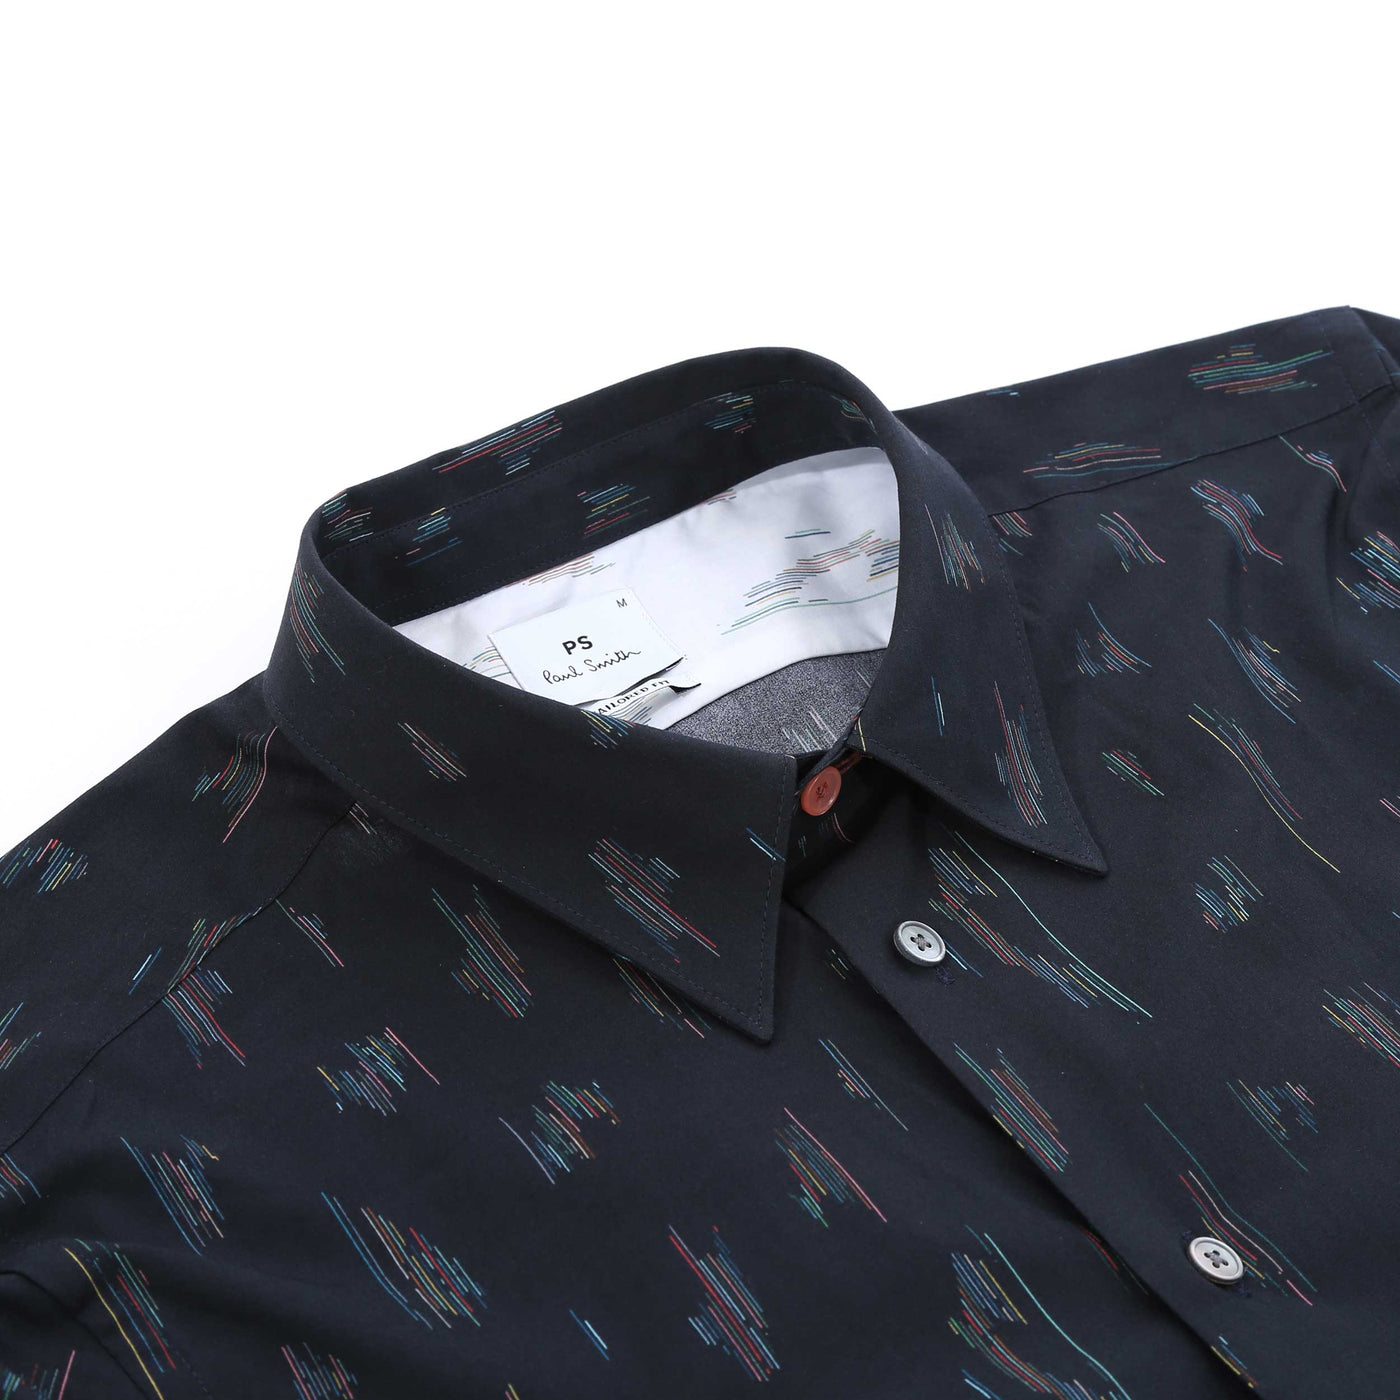 Paul Smith Tailored Fit Shirt in Black Collar